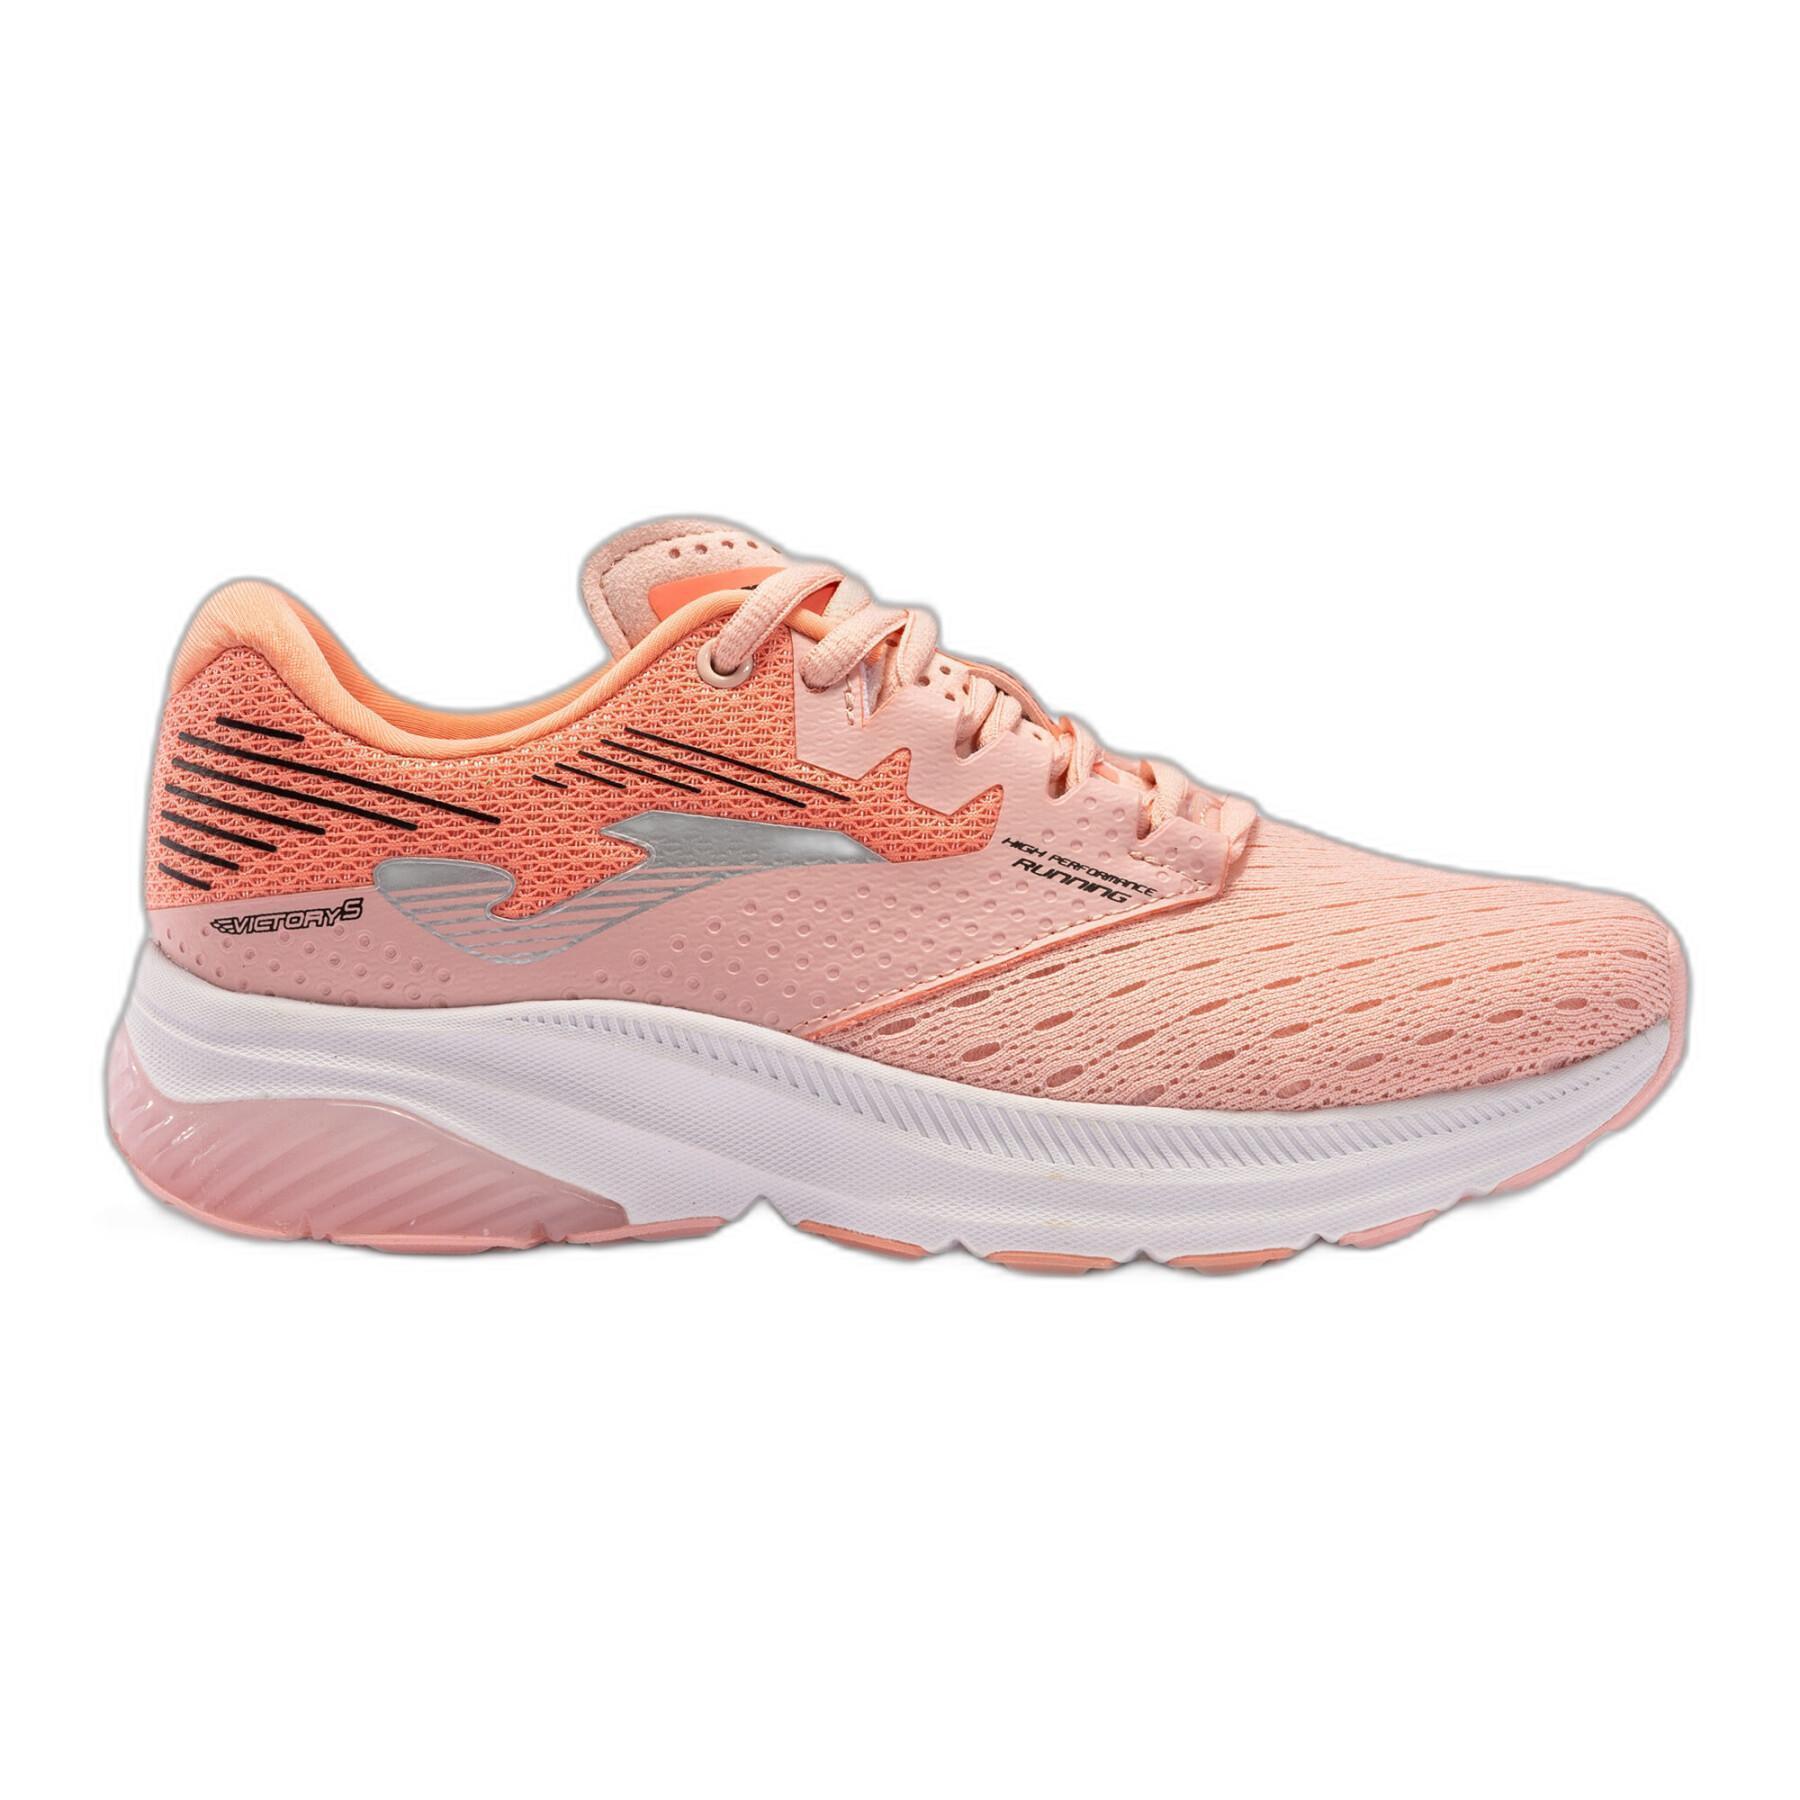 Chaussures de running femme Joma R.Victory